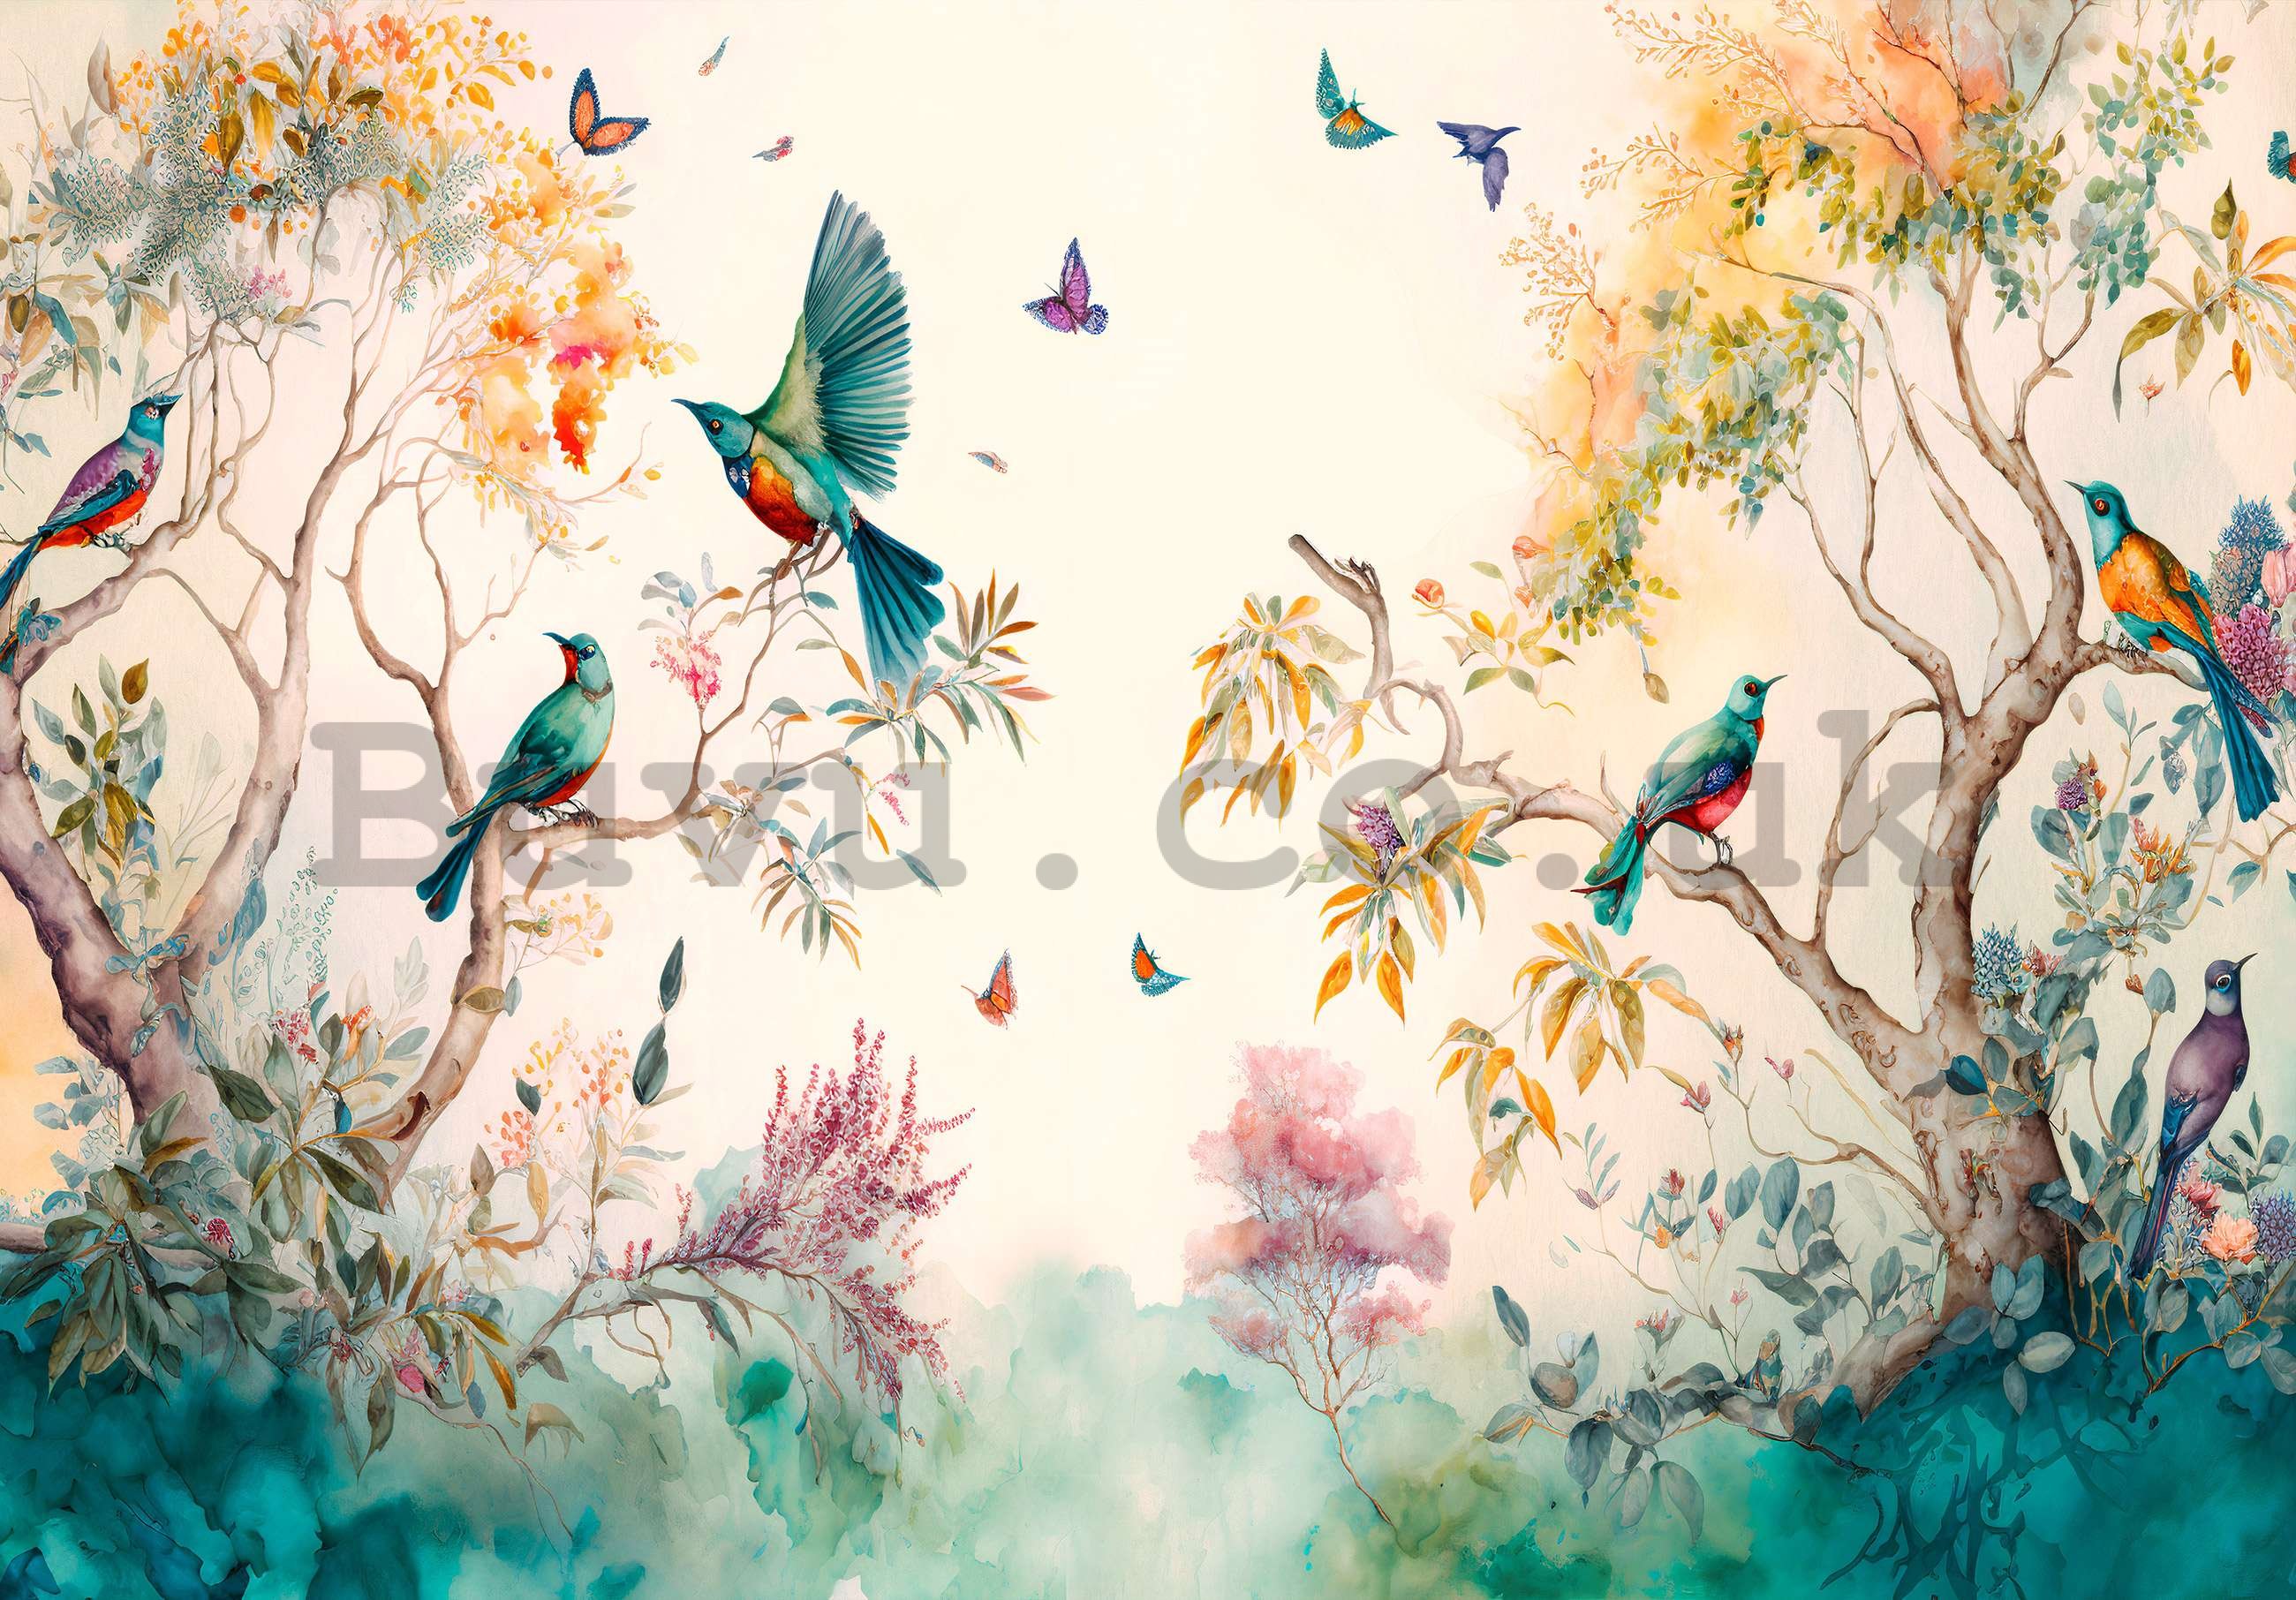 Wall mural vlies: Birds on trees (painted) - 416x254 cm